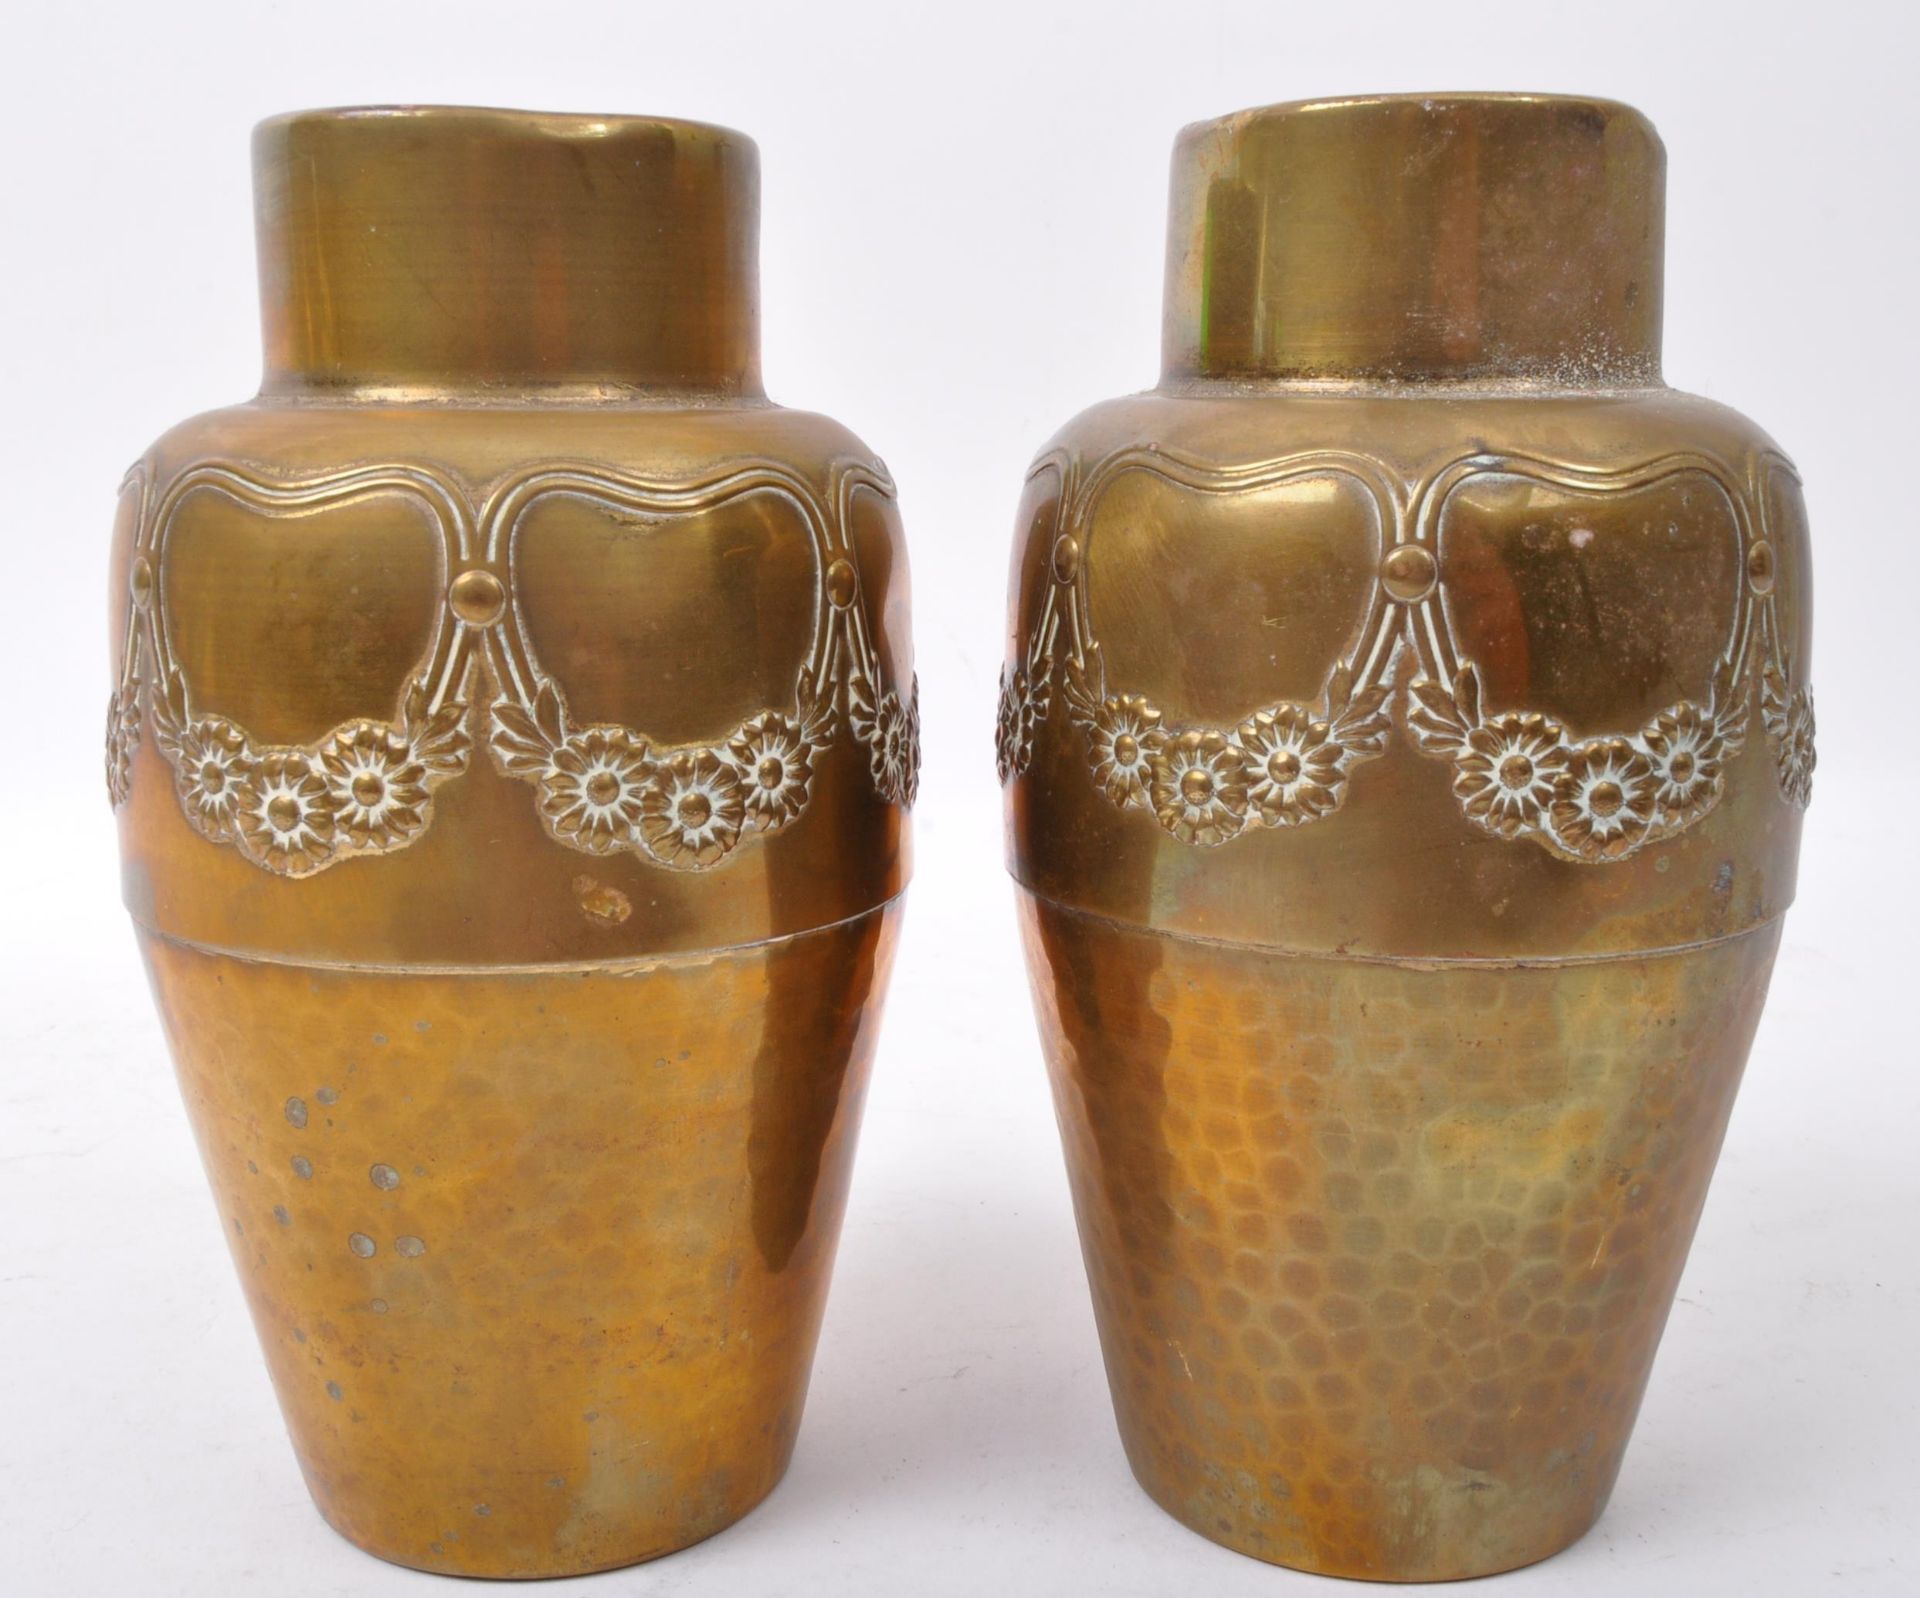 PAIR OF EARLY 20TH CENTURY GERMAN WMF ART NOUVEAU VASES